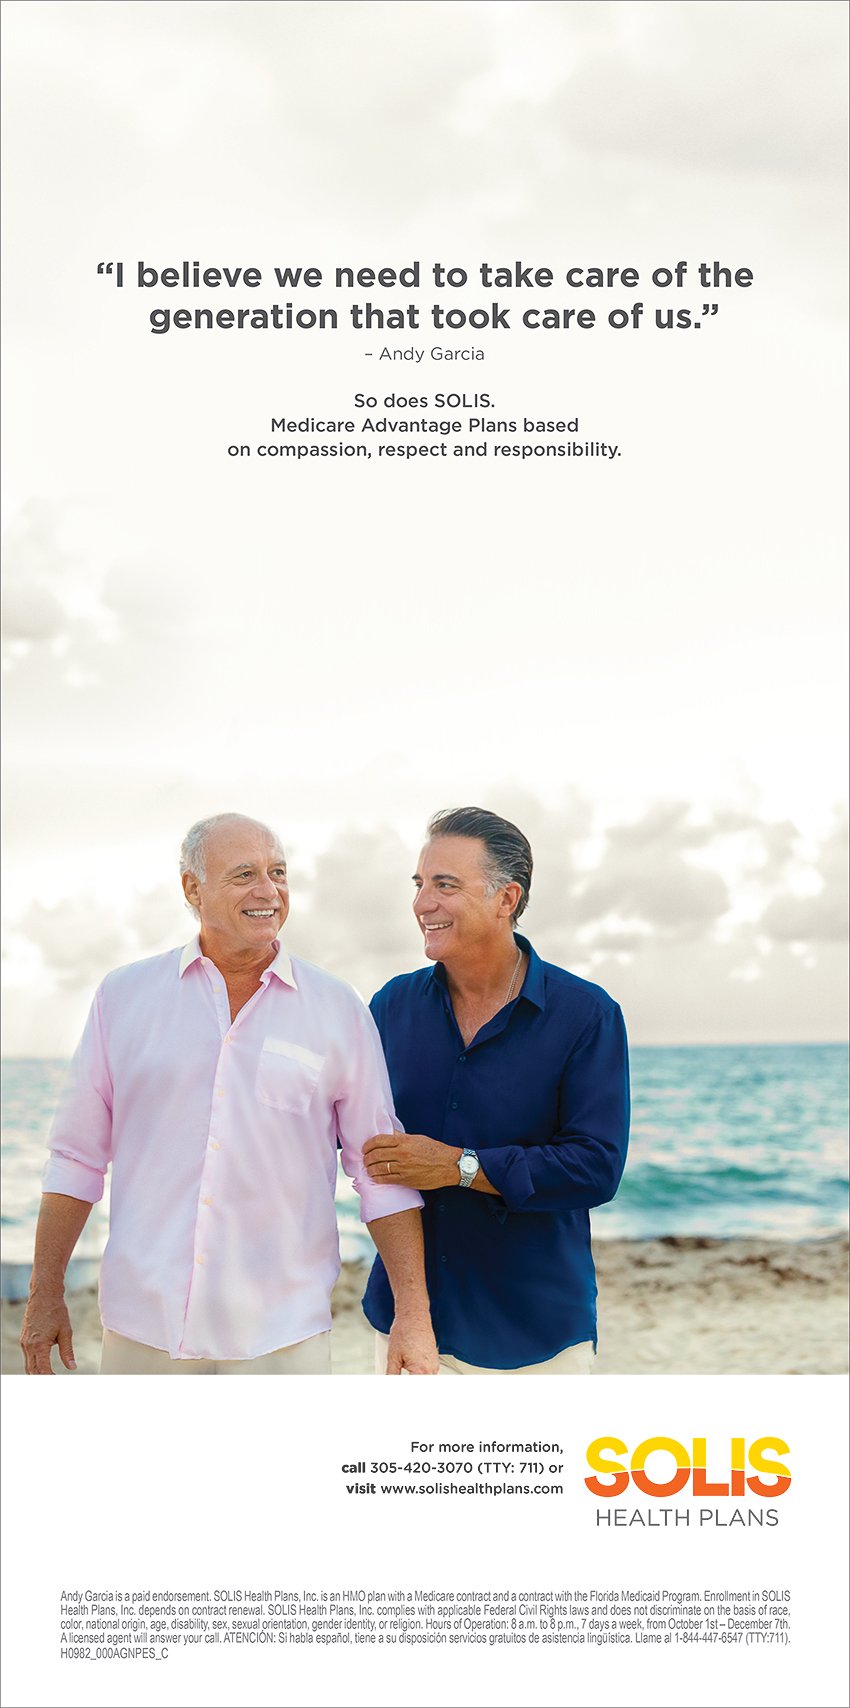 Tearsheet advertising Solis Health featuring a photo by Steve Boxall showing Andy Garcia walking on a beach supporting an older man.